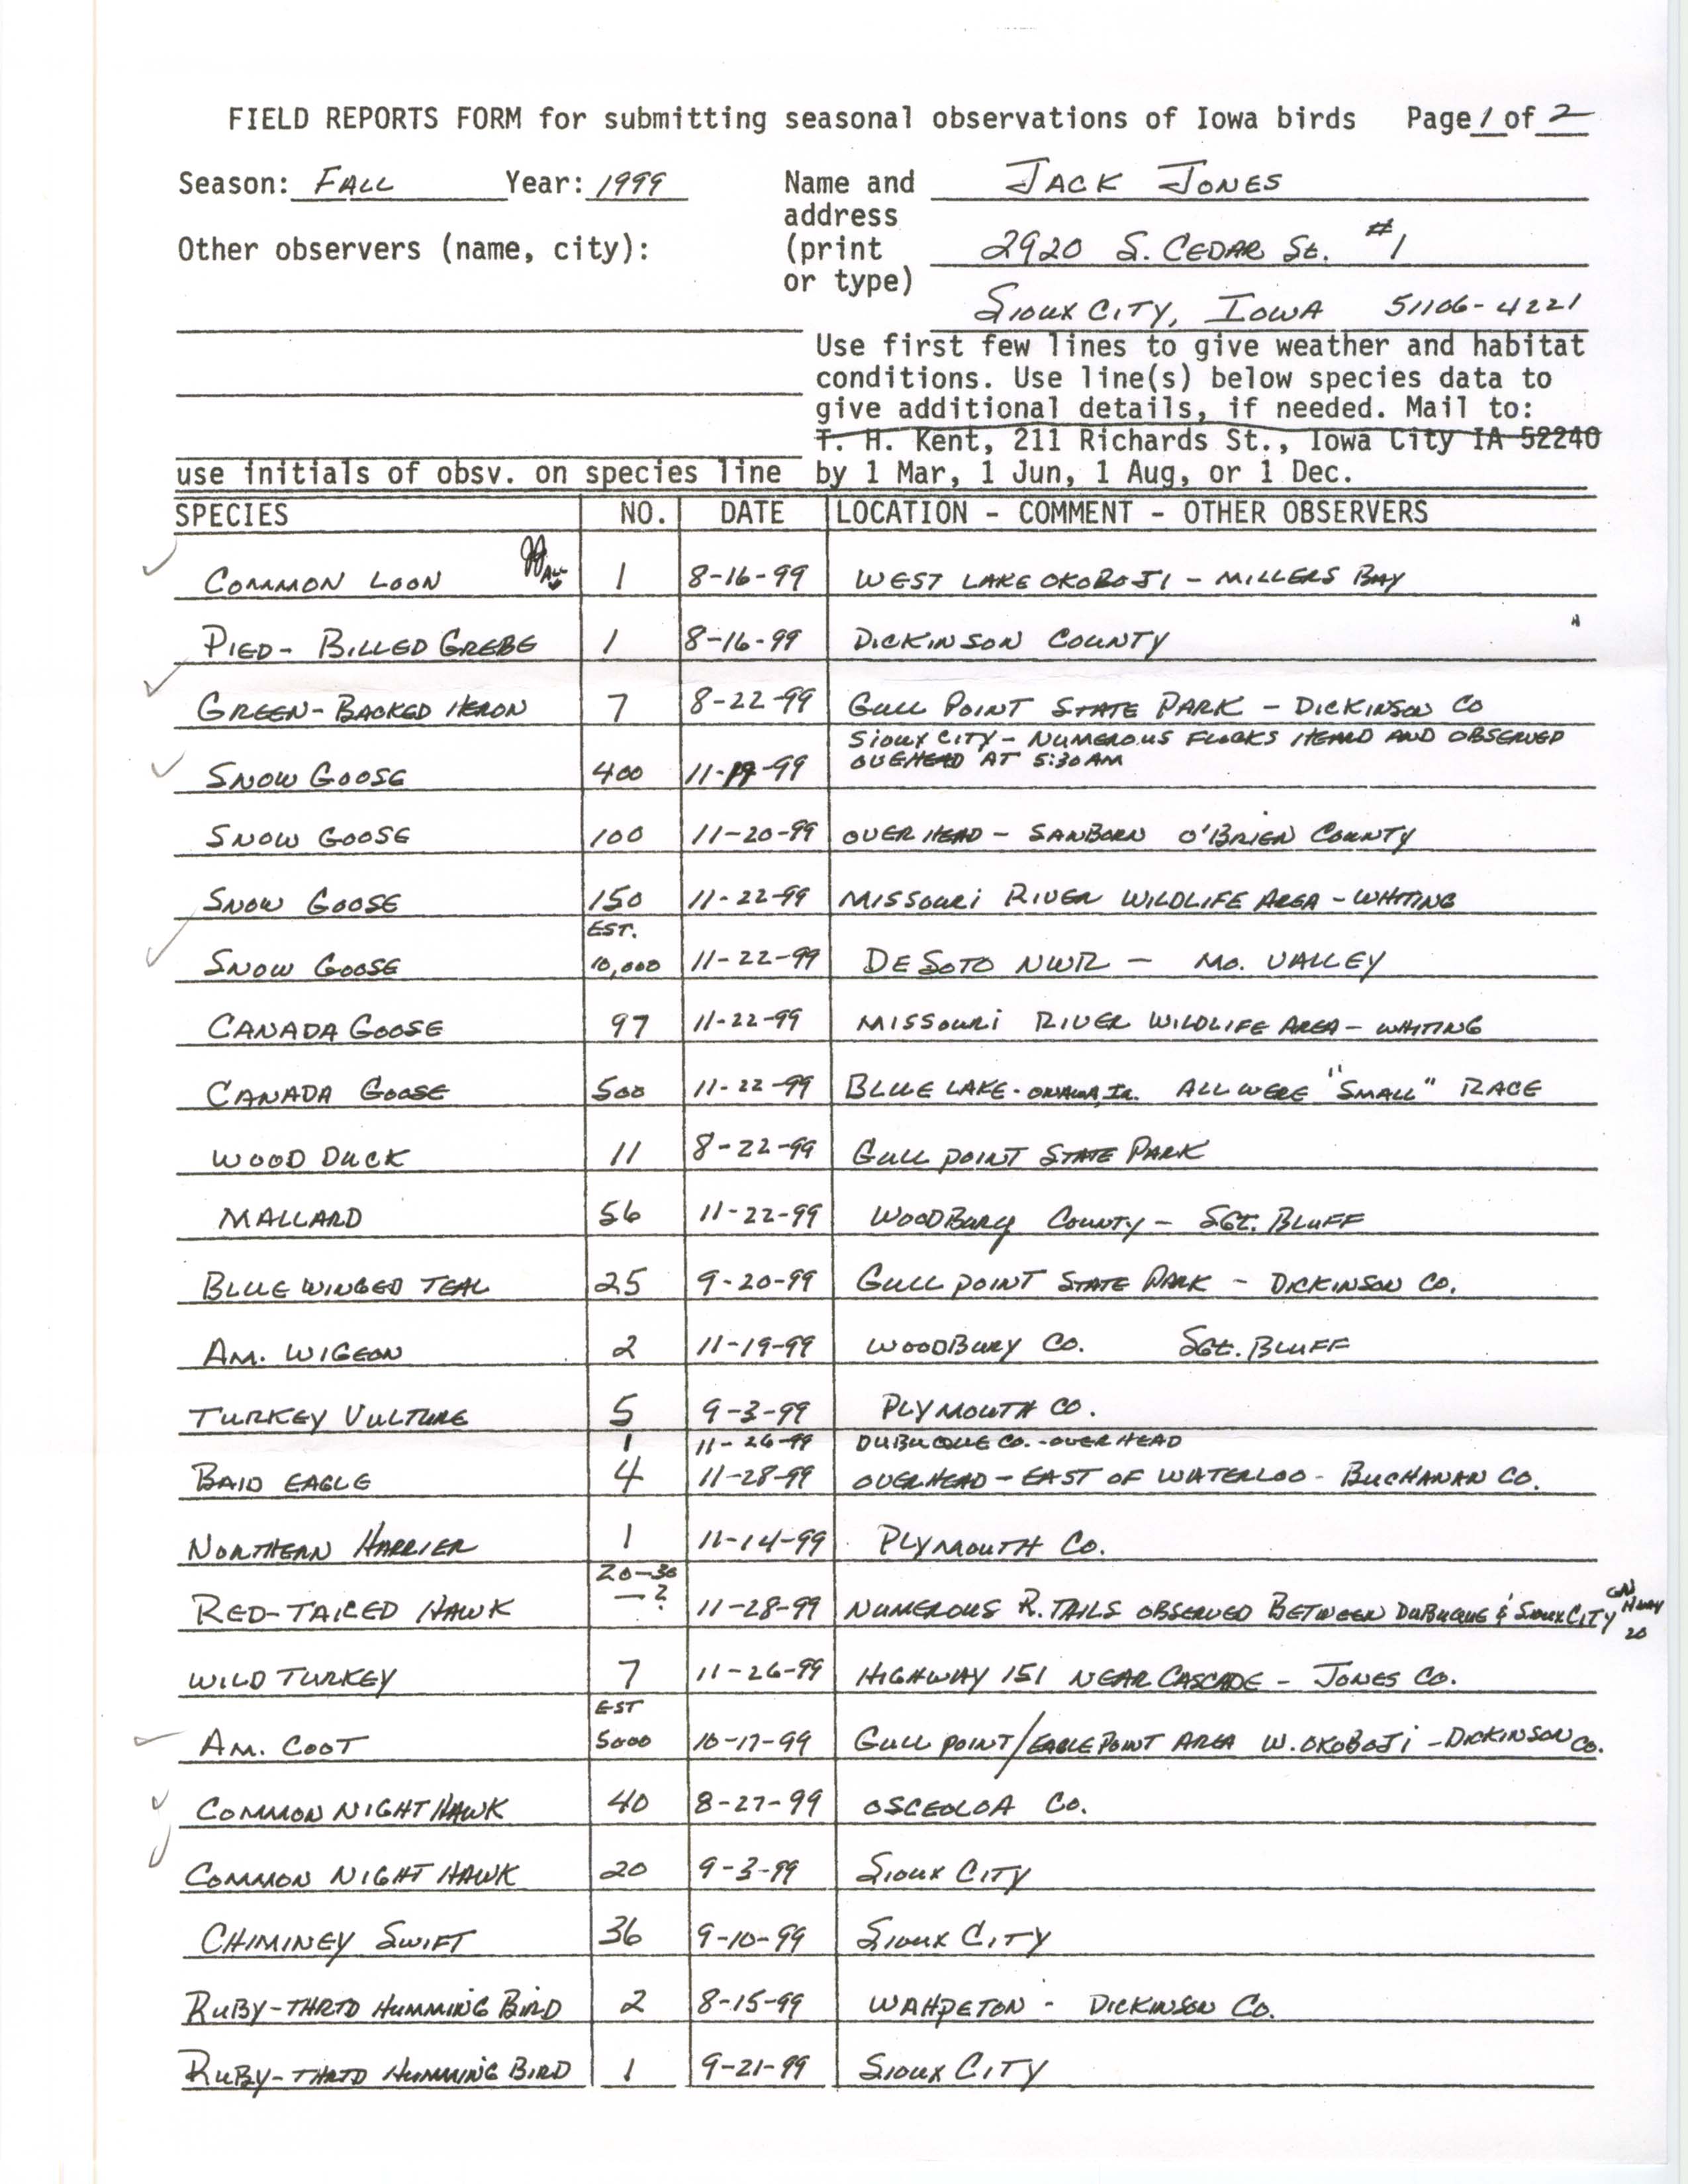 Field reports form for submitting seasonal observations of Iowa birds, fall 1999, Jack Jones